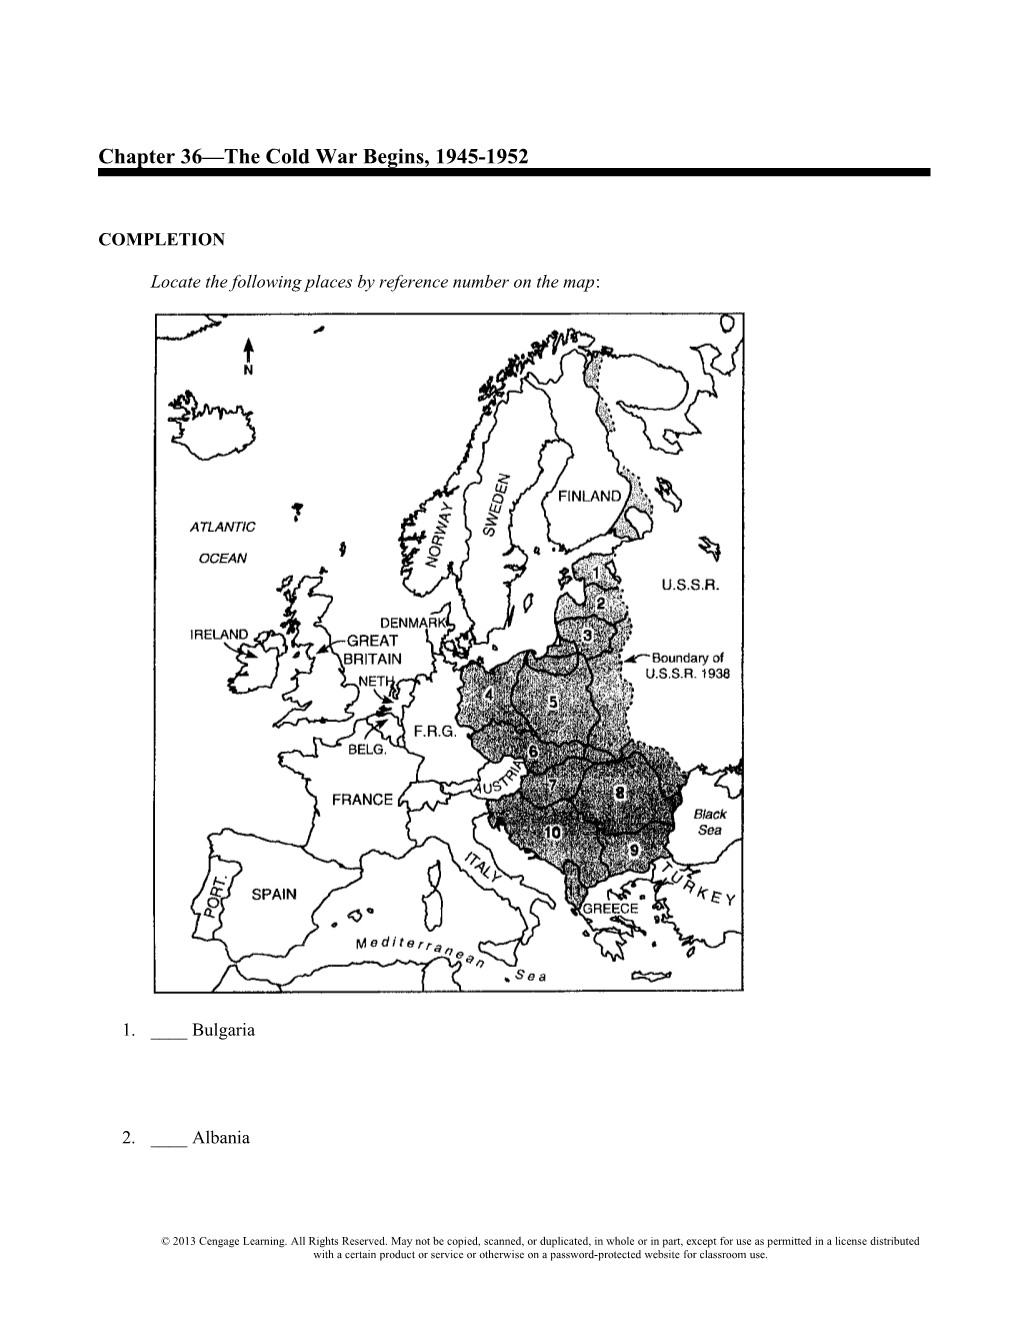 Chapter 36—The Cold War Begins, 1945-1952